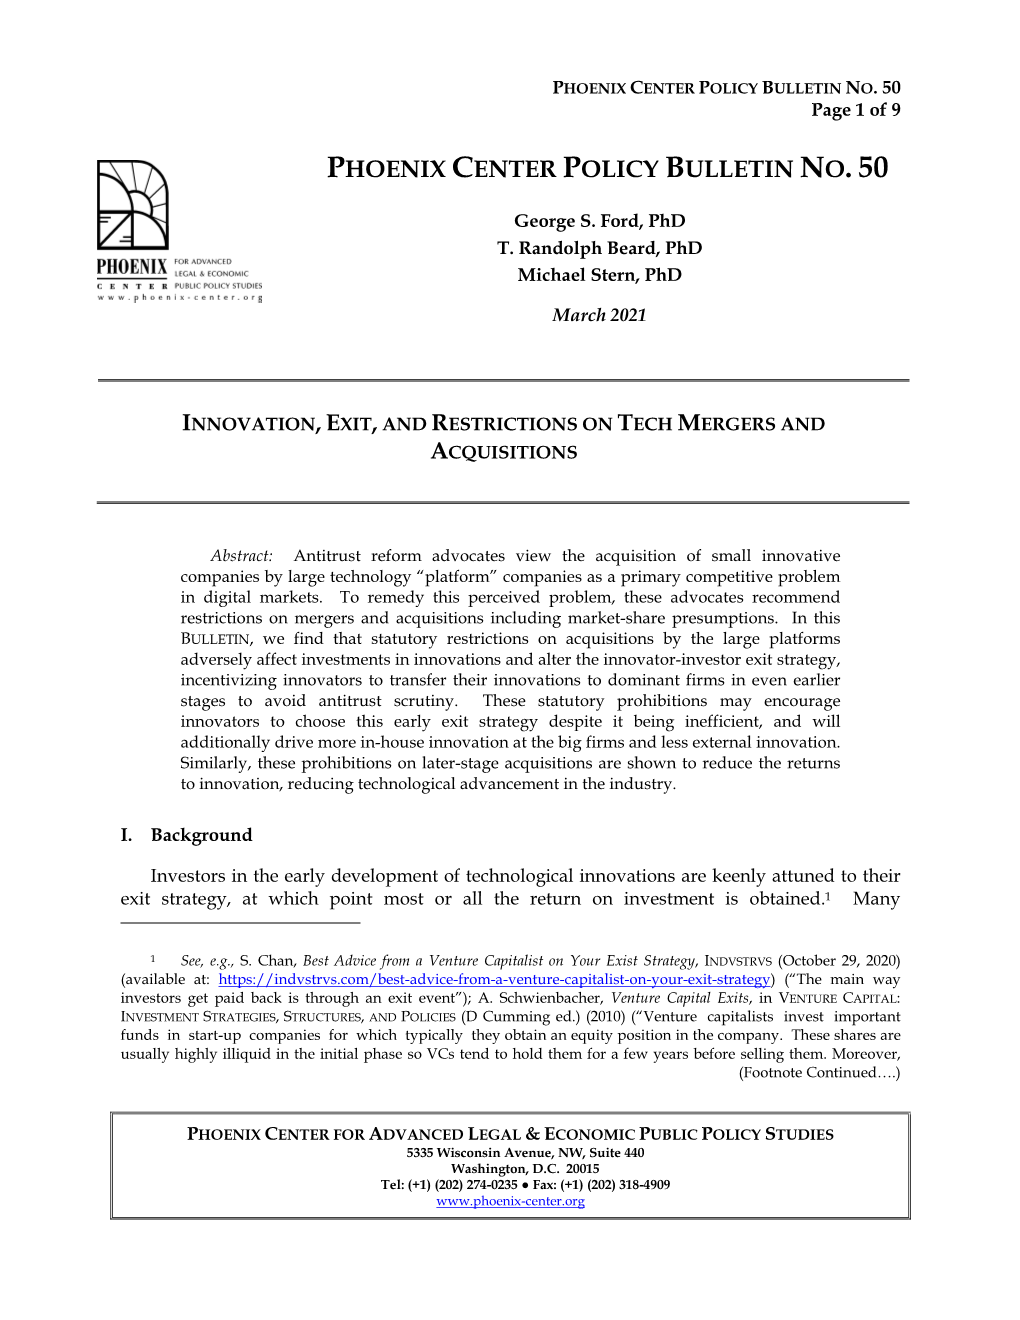 PHOENIX CENTER POLICY BULLETIN NO. 50 Page 1 of 9